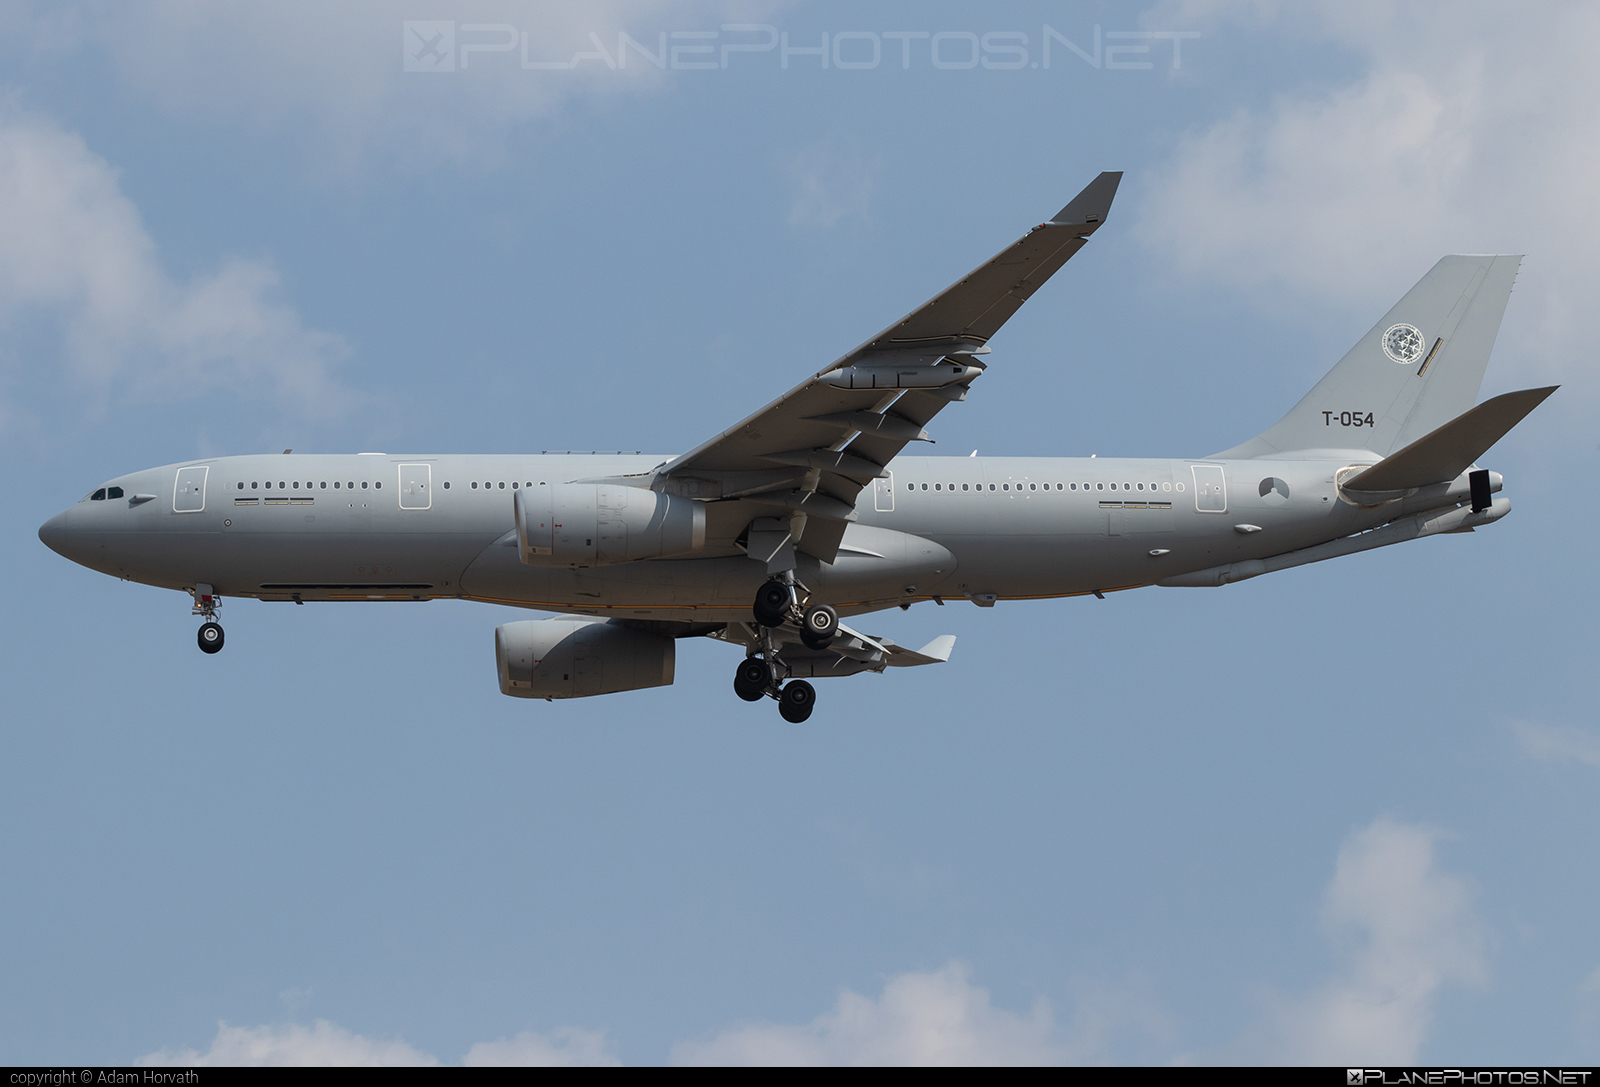 Airbus Military A330-243MRTT - T-054 operated by Koninklijke Luchtmacht (Royal Netherlands Air Force) #a330 #a330mrtt #airbus330 #airbusmilitary #koninklijkeluchtmacht #royalnetherlandsairforce